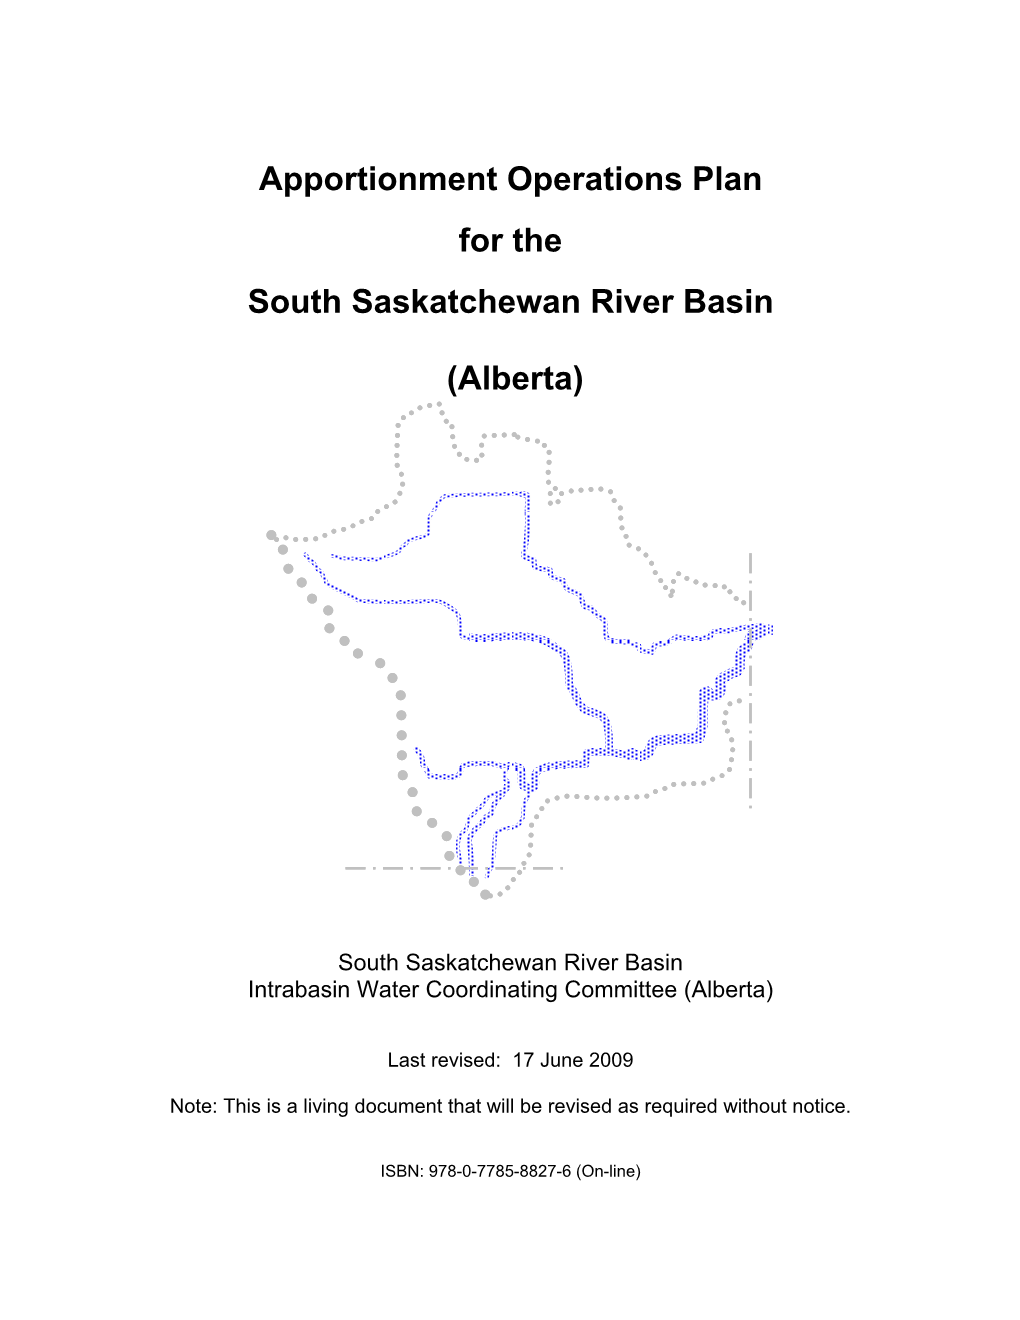 Apportionment Operations Plan for the South Saskatchewan River Basin